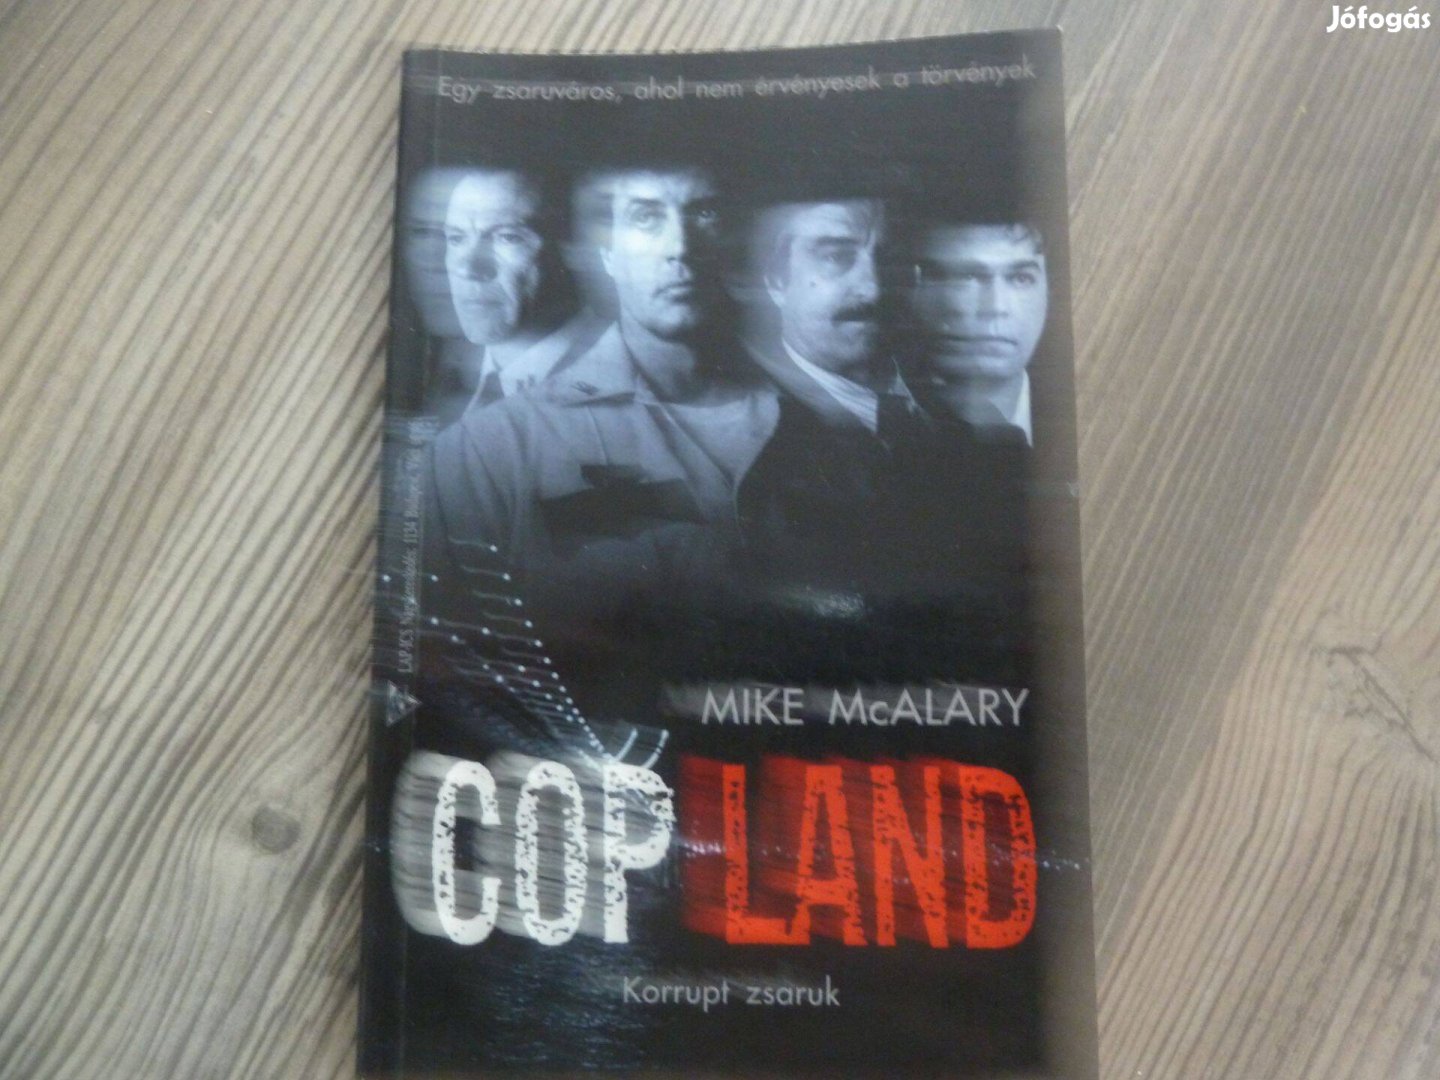 Mike Mcalary: Cop Land